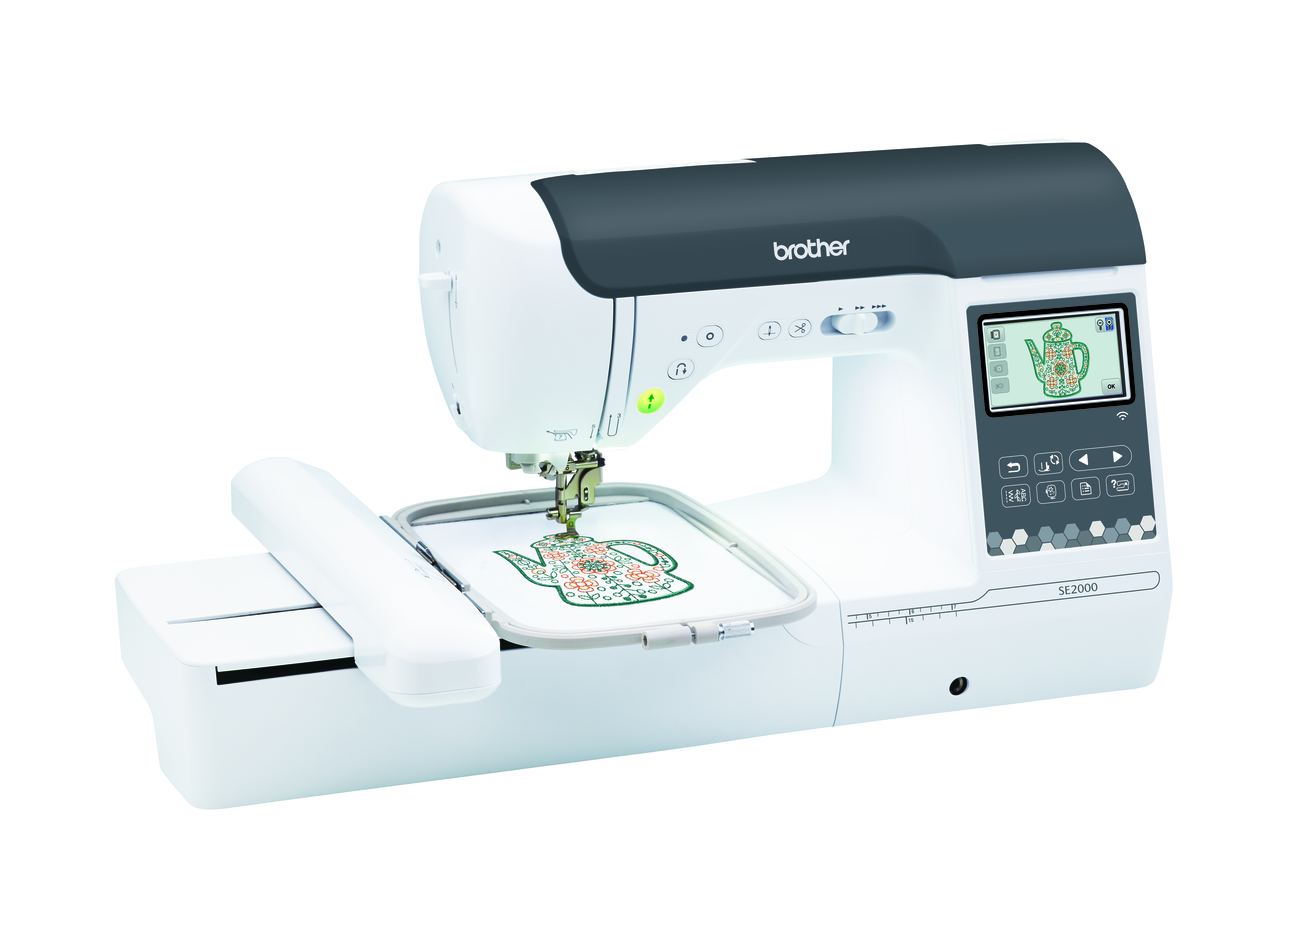 Combo Sewing and Embroidery Machine